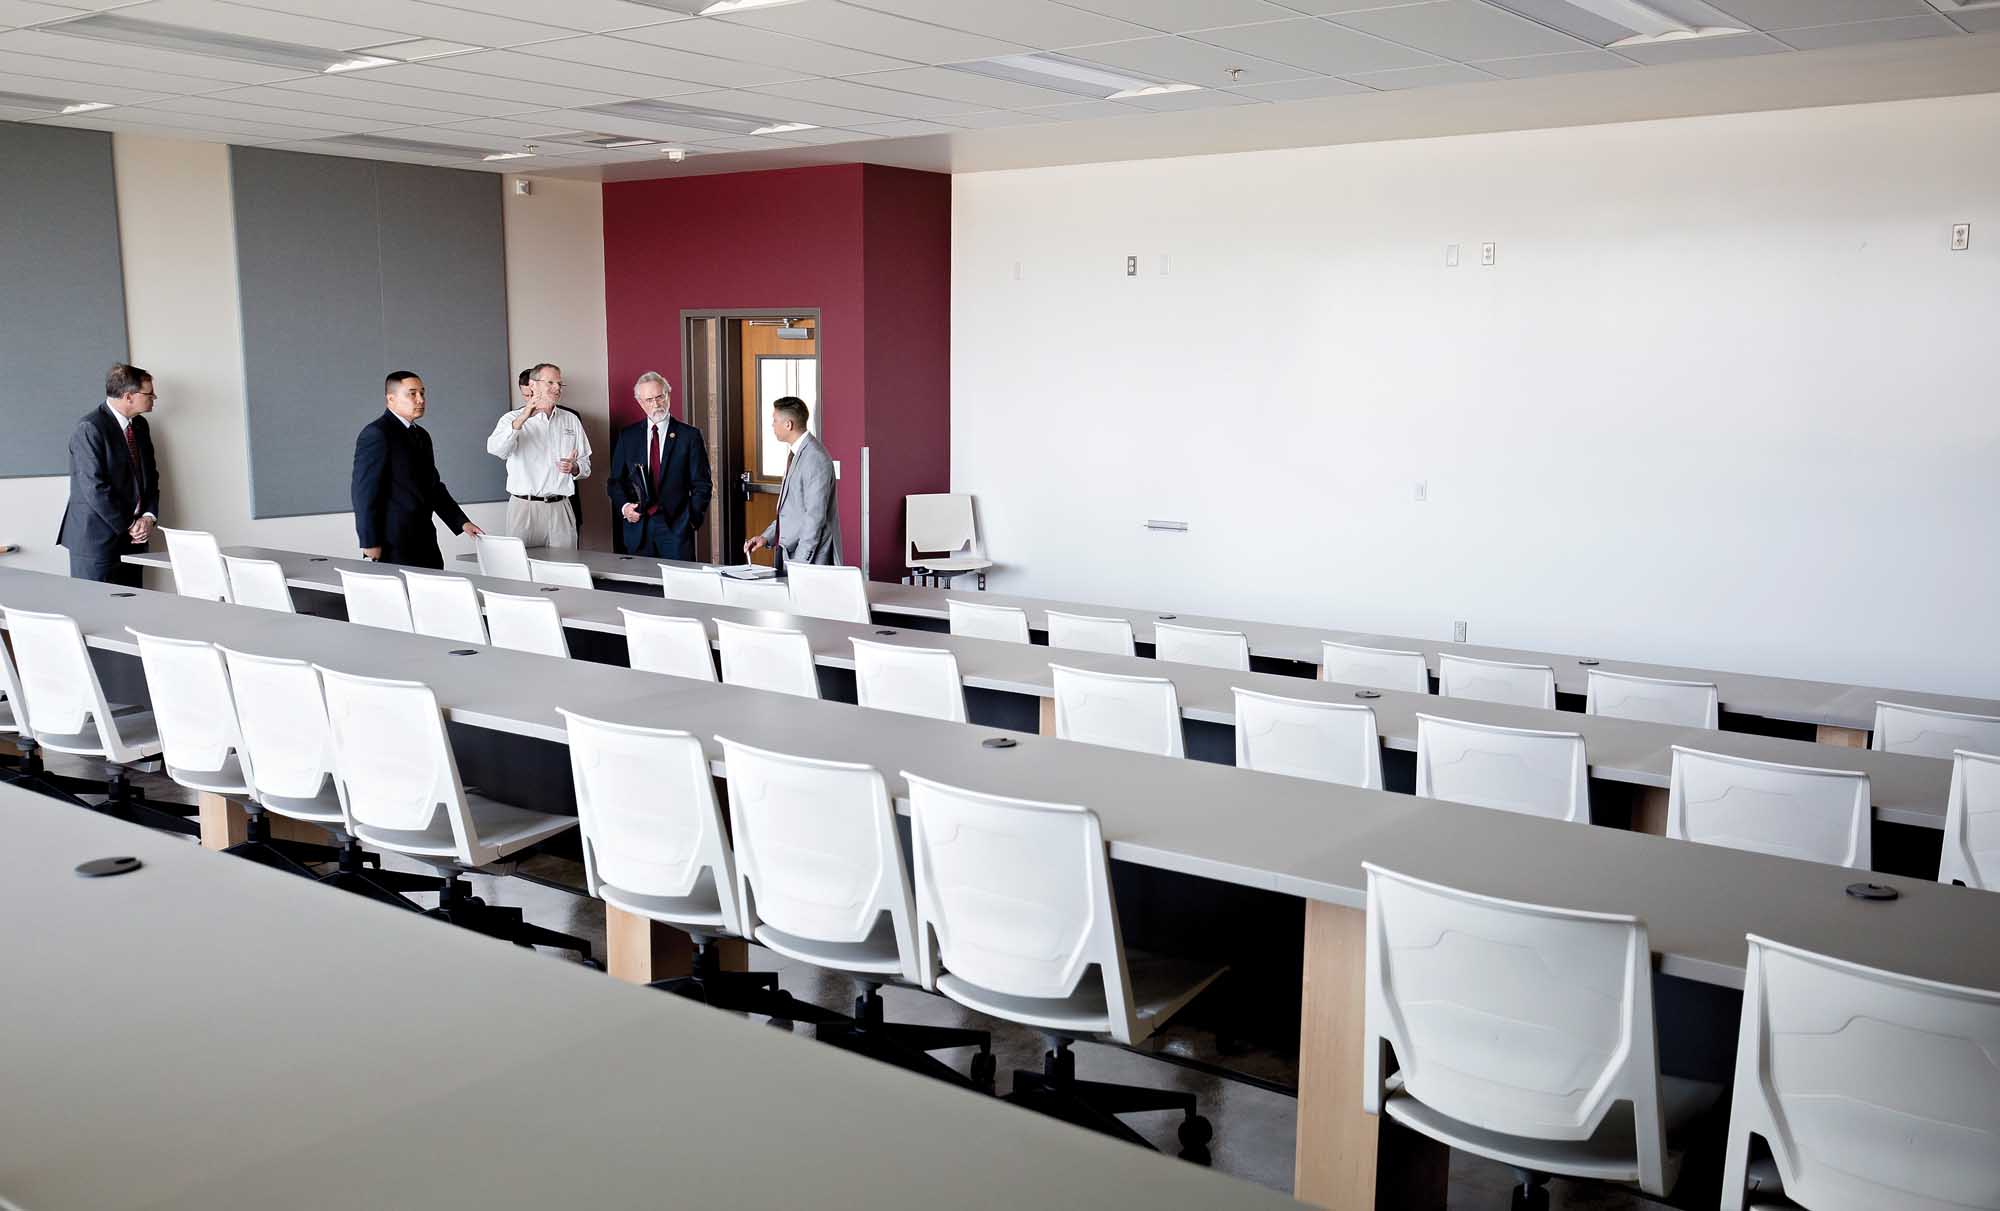 Thomas Henick-Kling, wearing white, leads a tour of the new Washington State University Wine Science Center to U.S. Rep. Dan Newhouse on May 4, 2015. This room offers live video conferencing for students to evaluate wine between educational institutions, growers and winemakers across the globe.(TJ Mullinax/Good Fruit Grower)